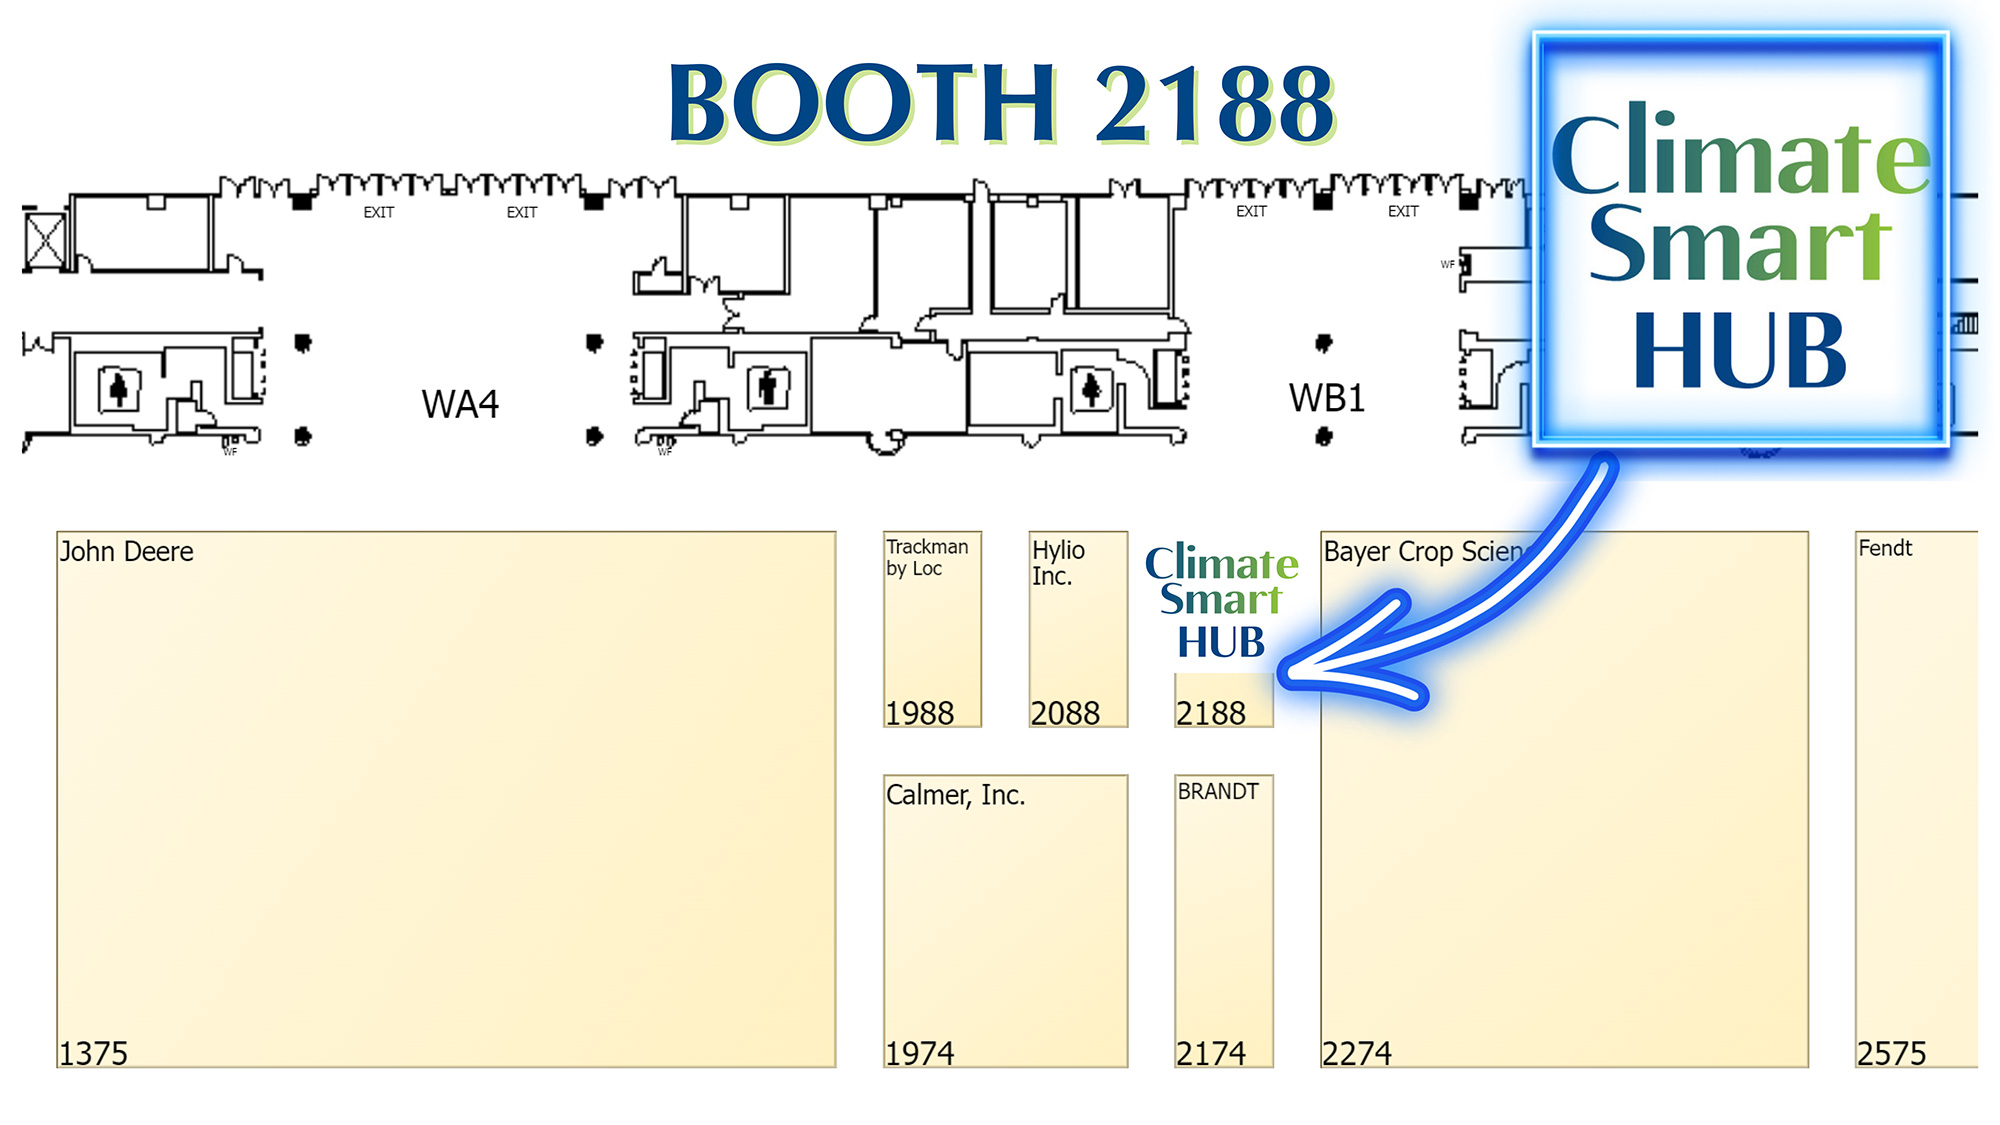 Climate Smart Hub | Booth 2188